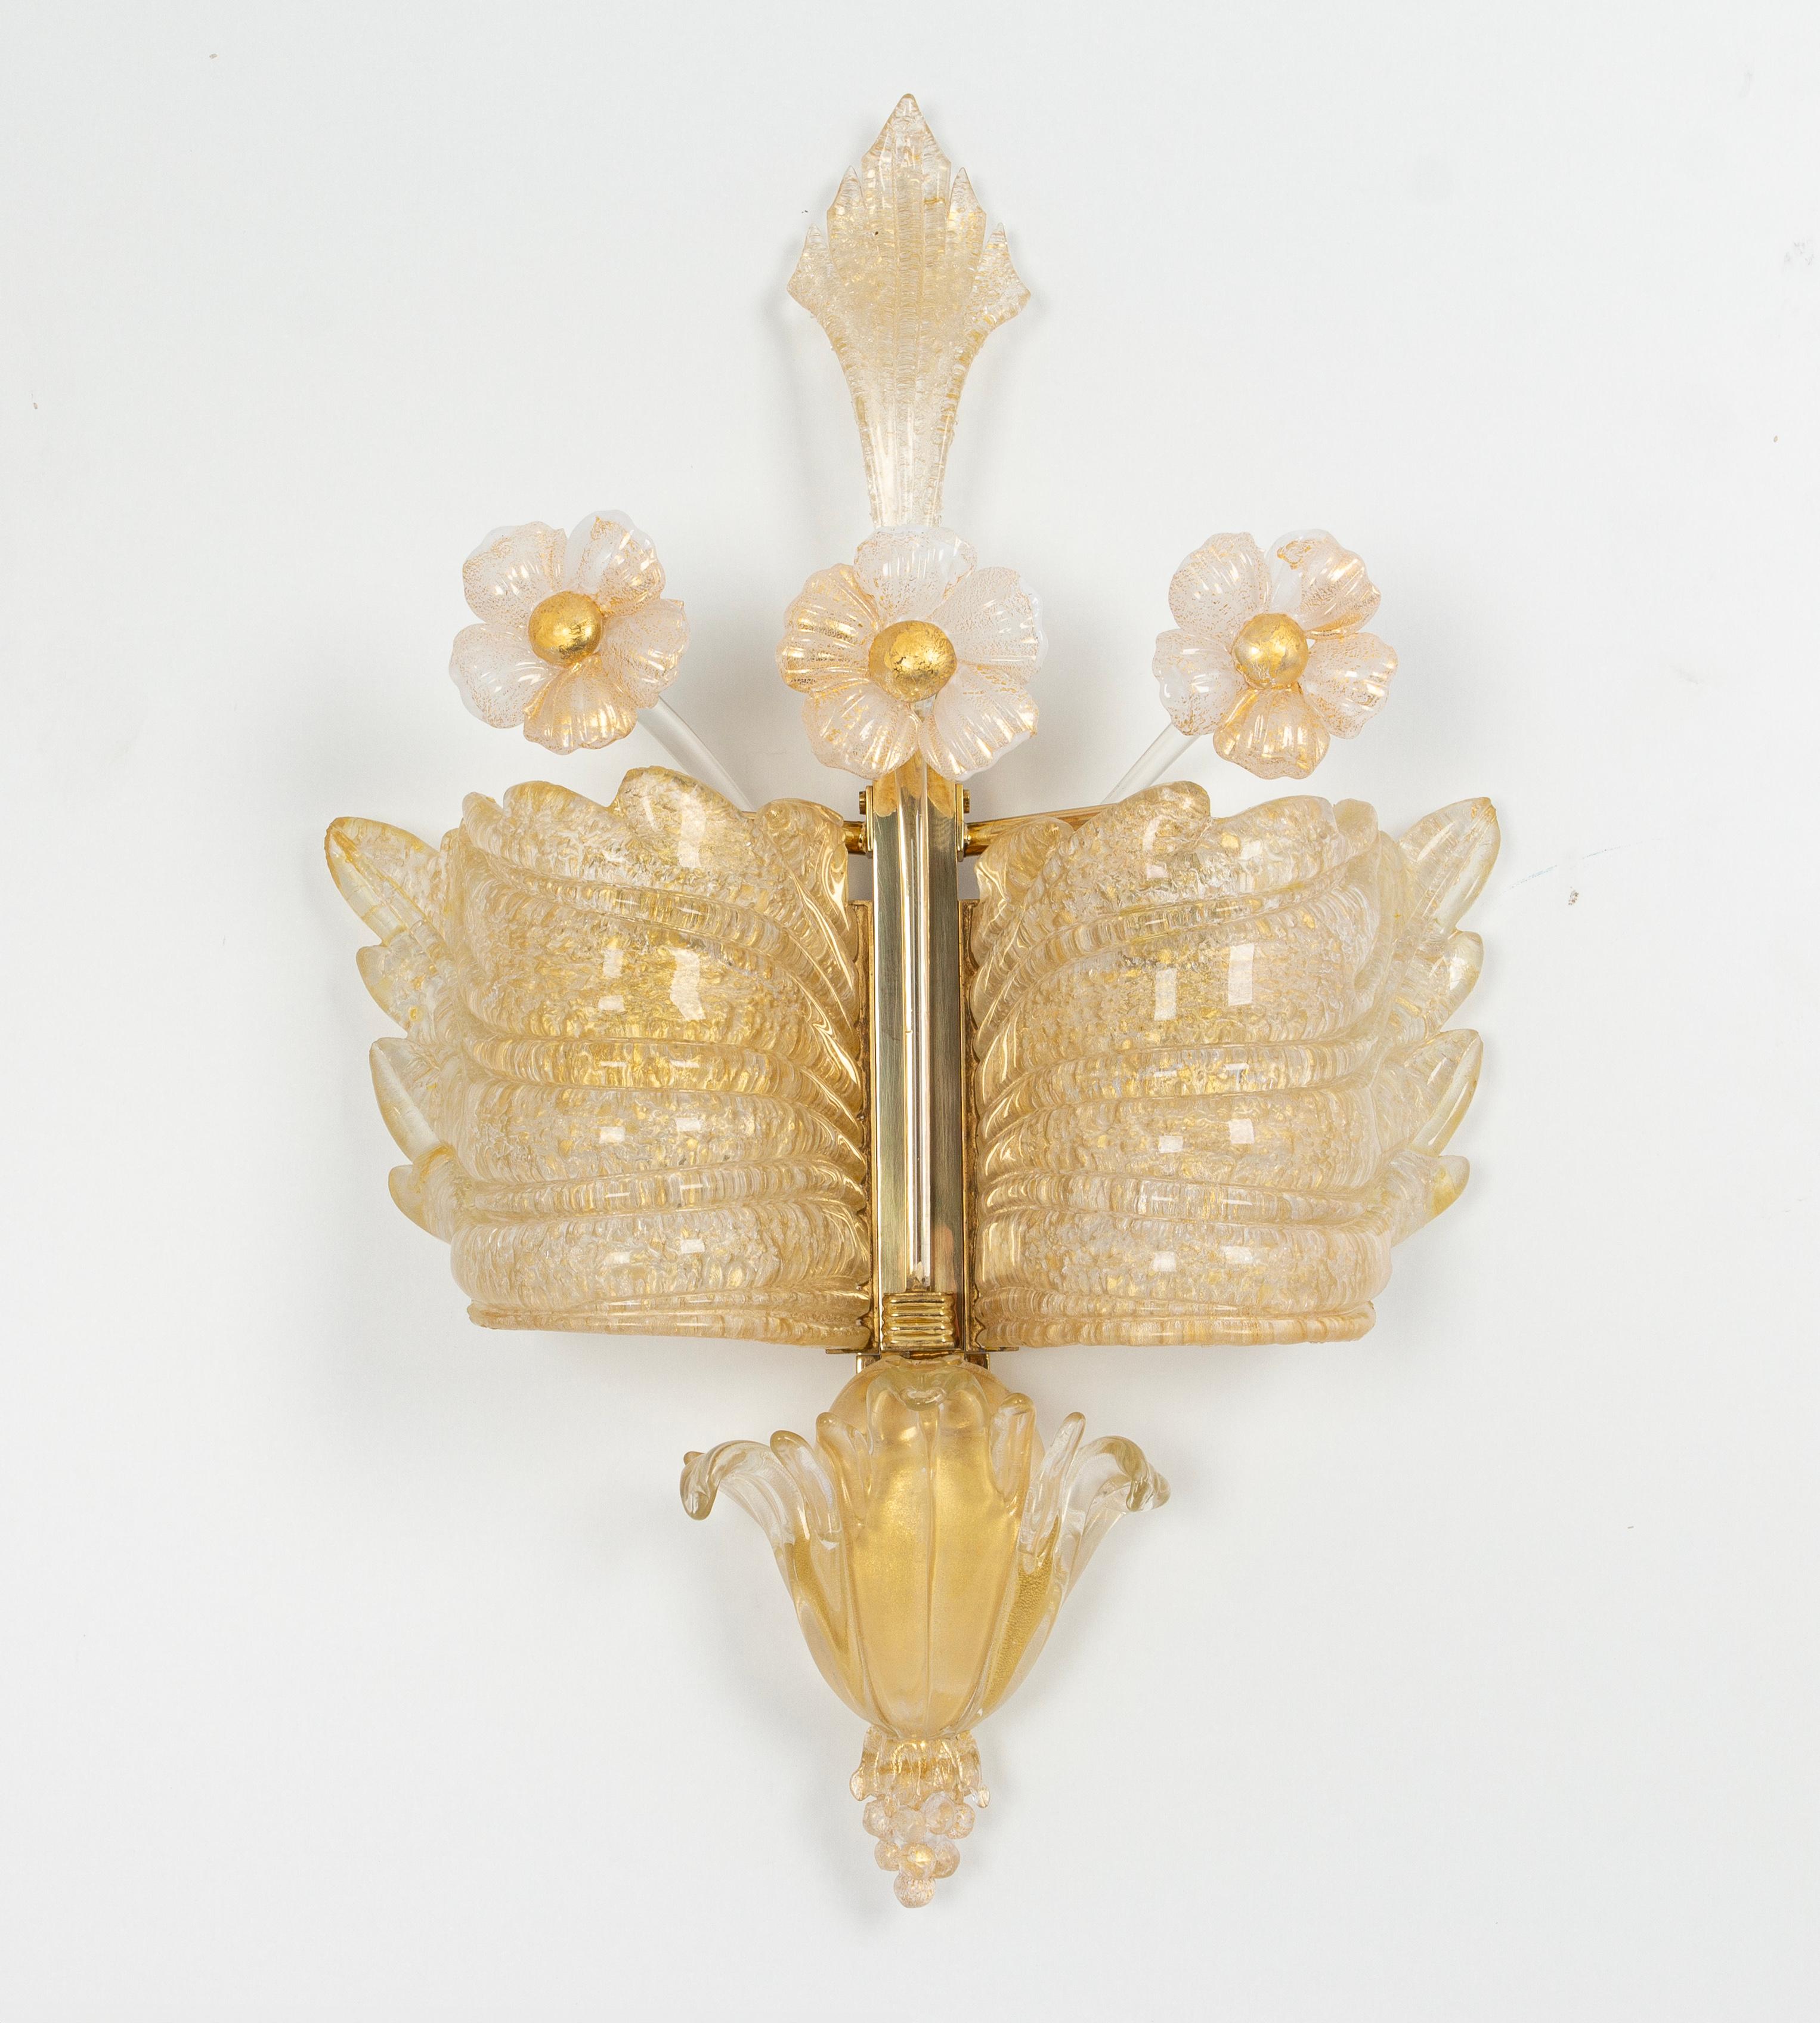 Italian Pair of Large Murano Glass Wall Sconces by Barovier & Toso, Italy, 1970s For Sale